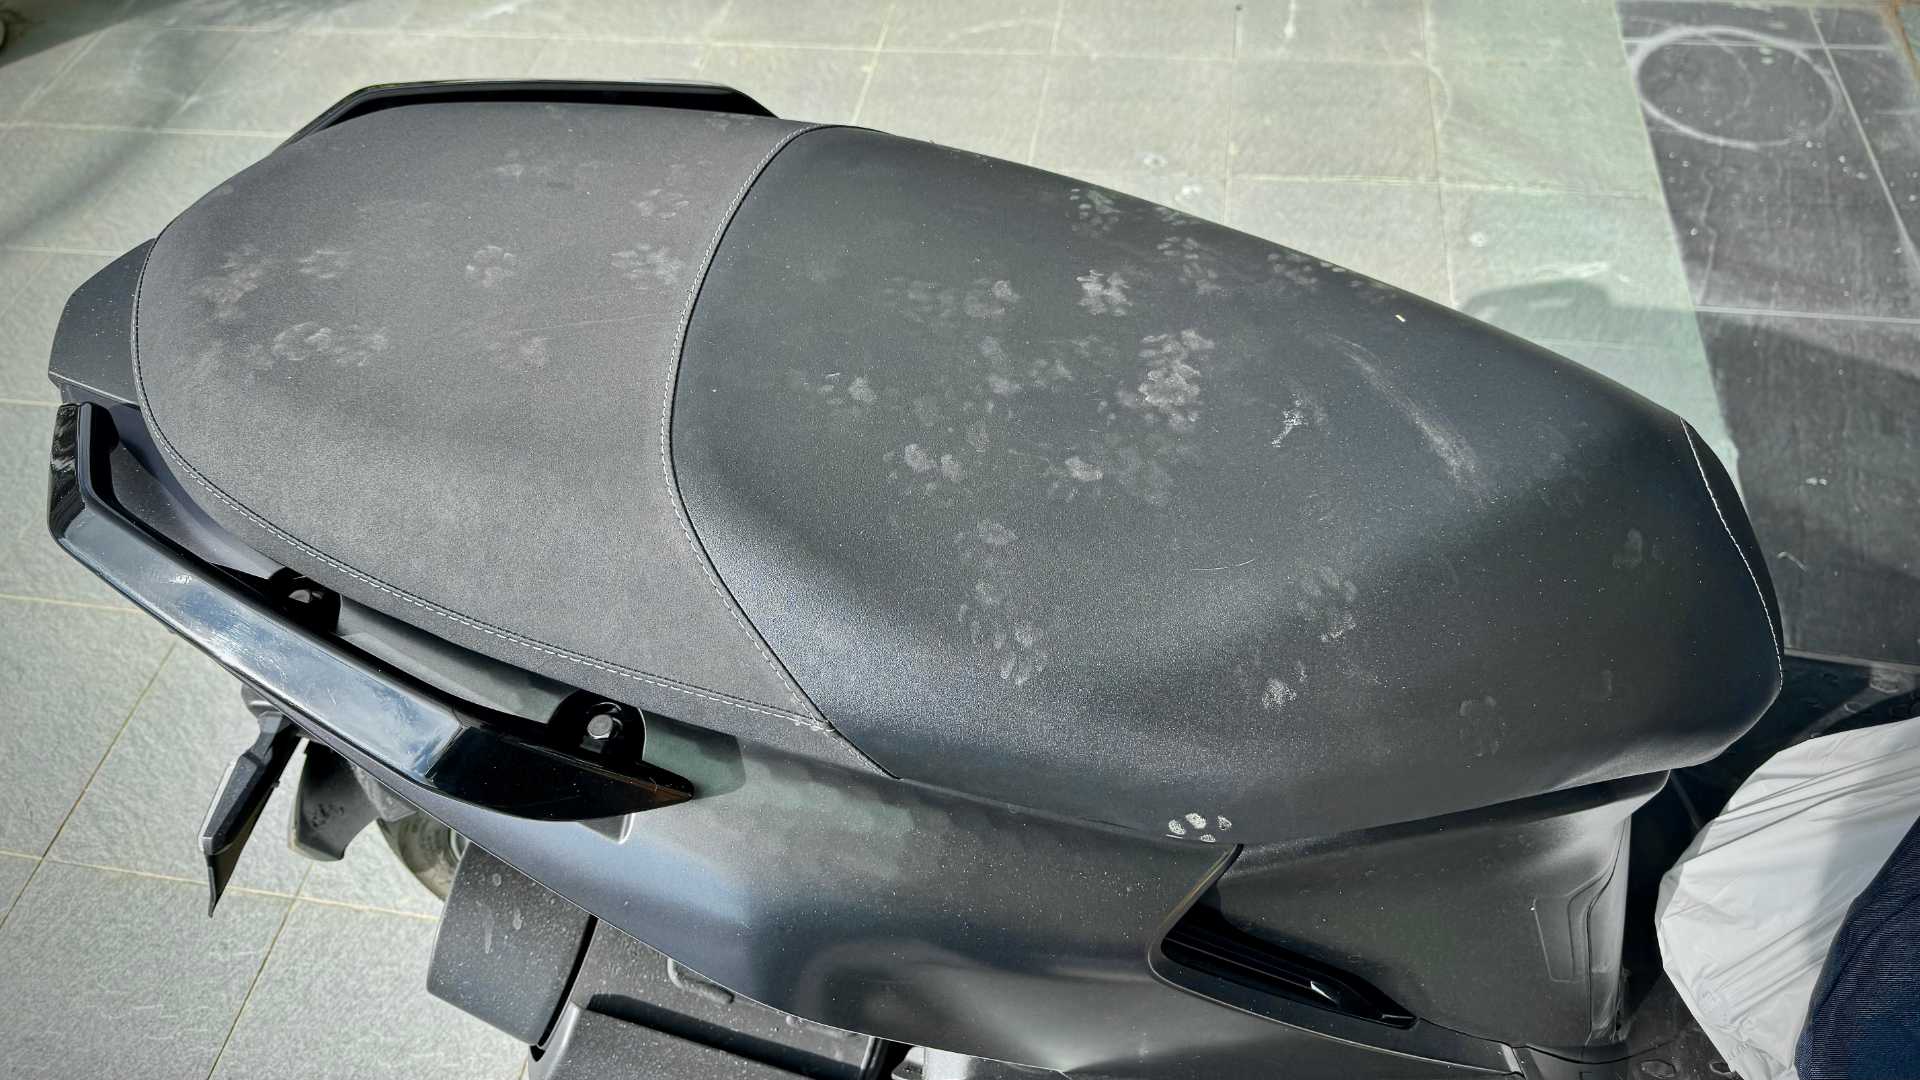 Numerous cat paw prints on a black scooter seat.